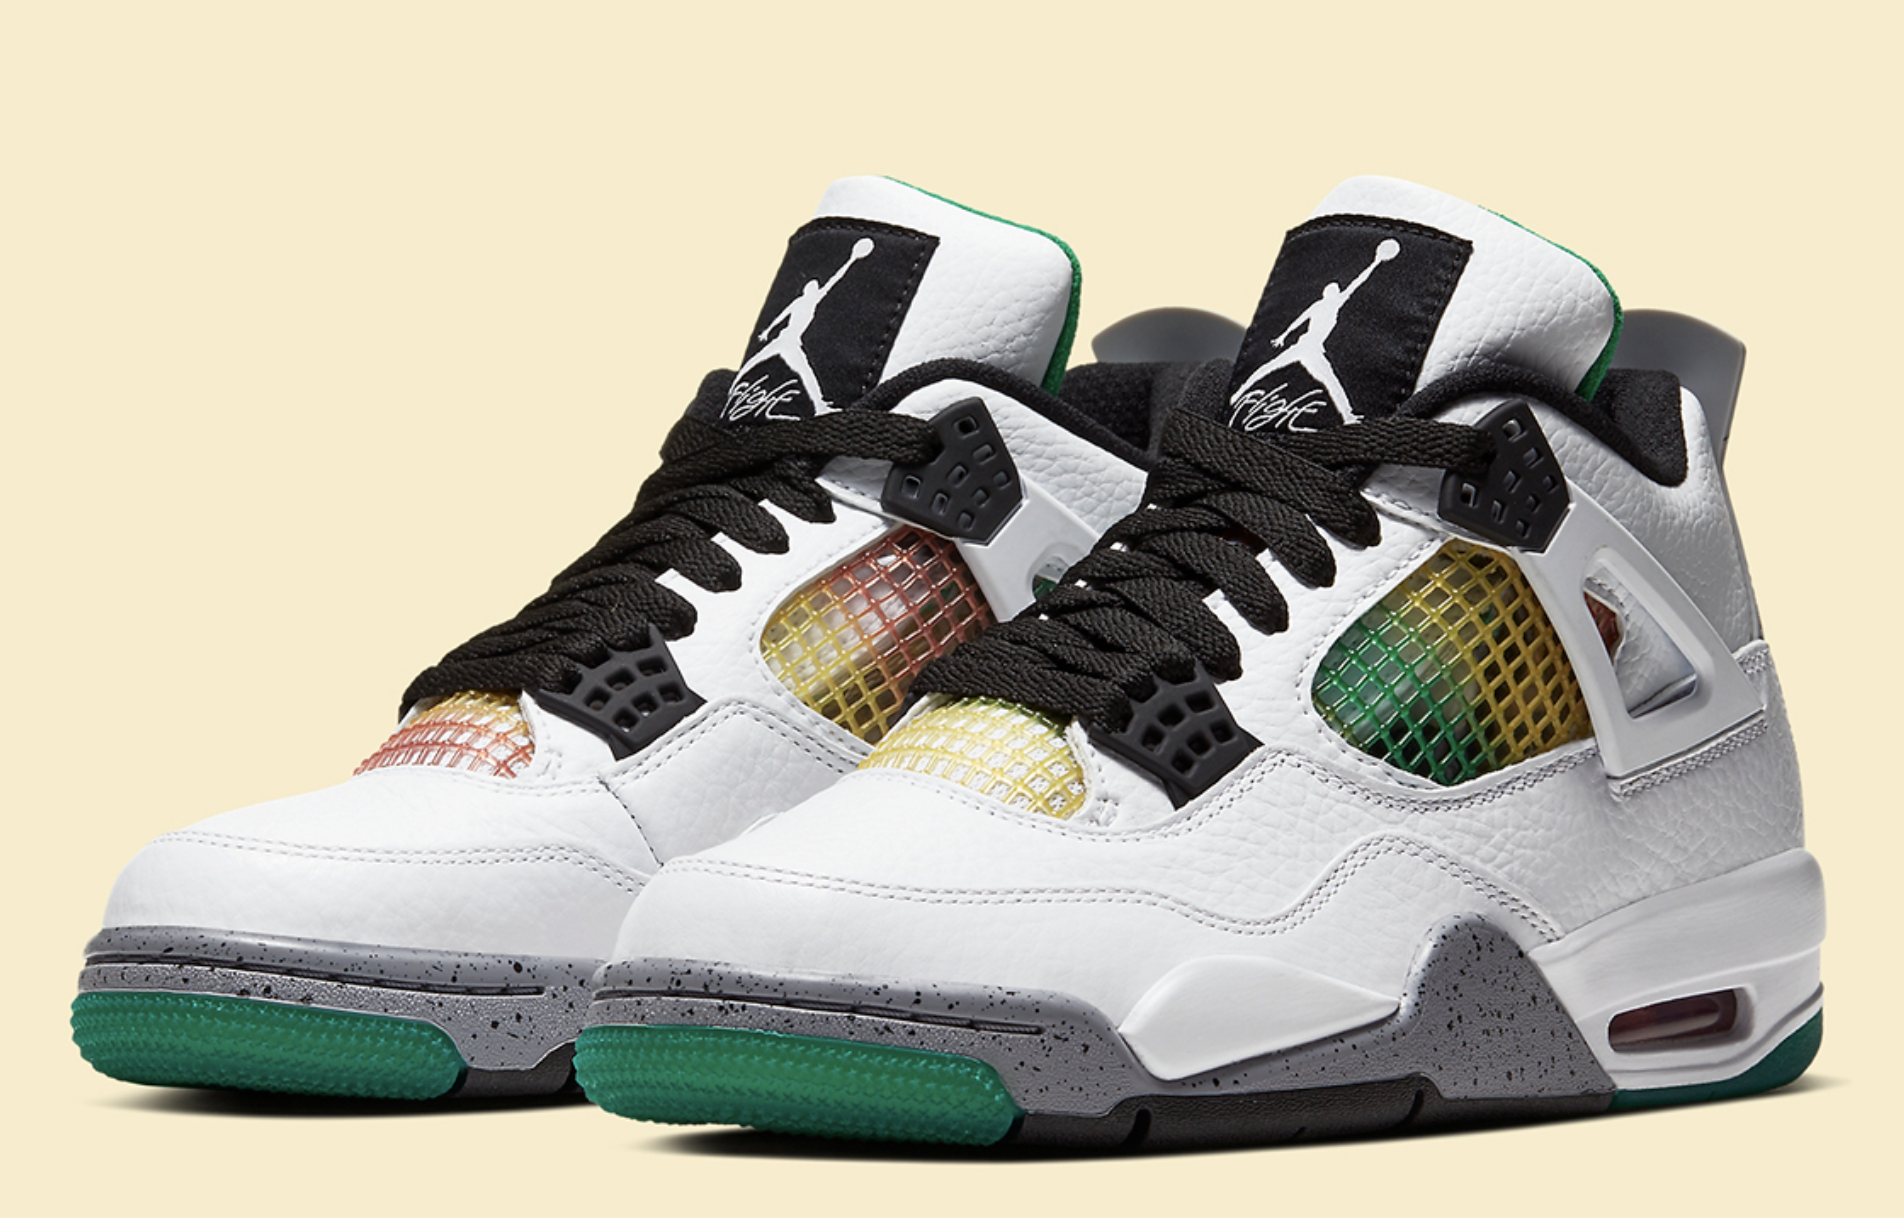 mild patrol spring Women's Air Jordan 4 “Do The Right Thing” — For The So[U]le